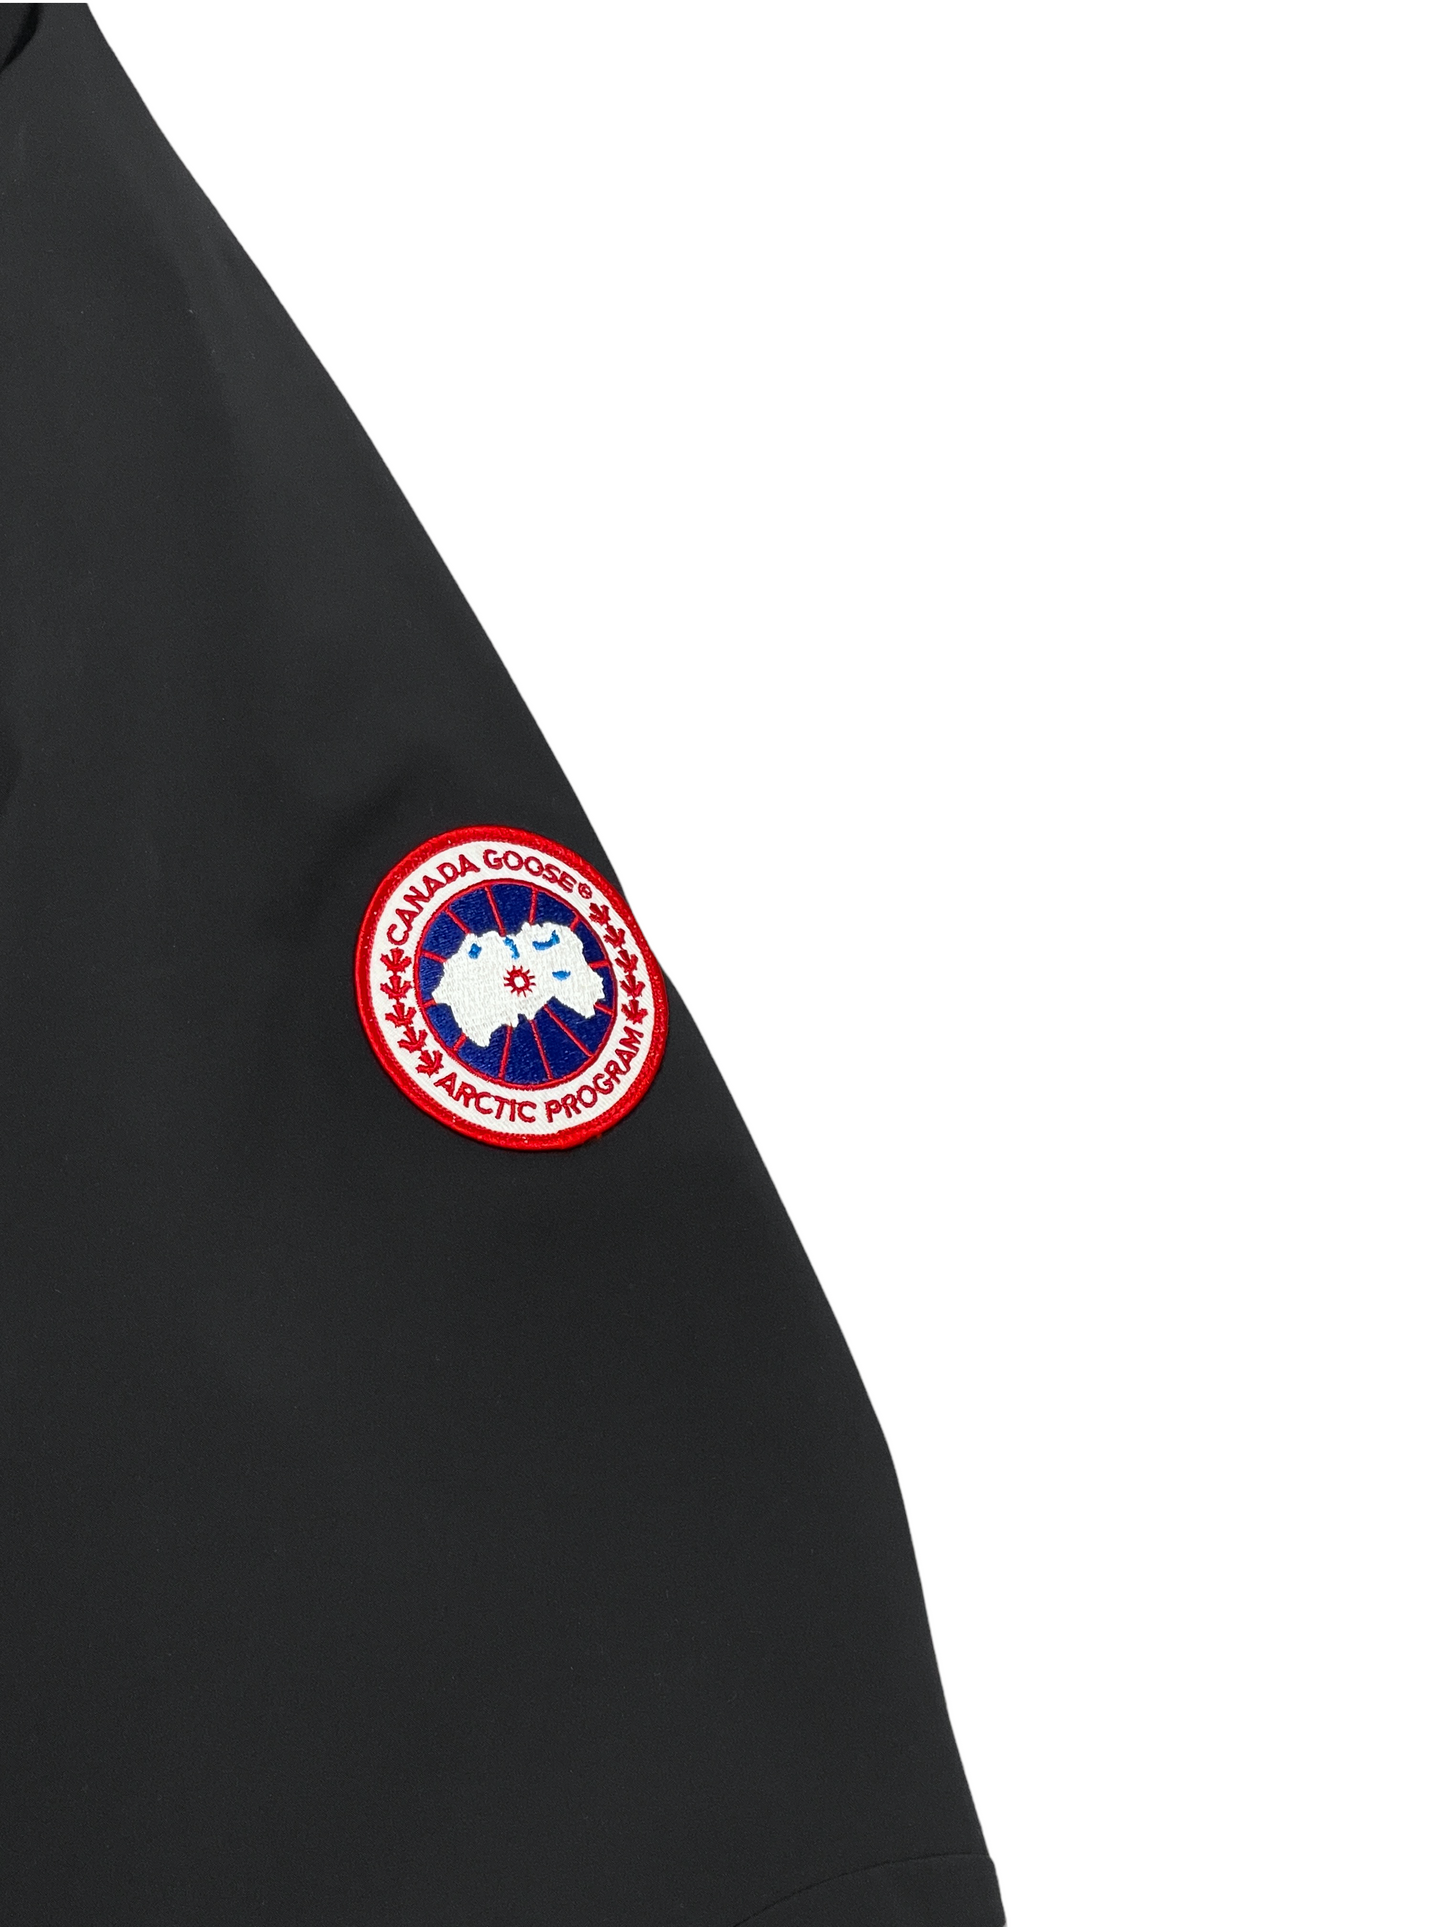 Canada Goose Black Waterproof Jacket Large - L—Genuine Design luxury consignment Calgary, Canada New & pre-owned clothing, shoes, accessories.